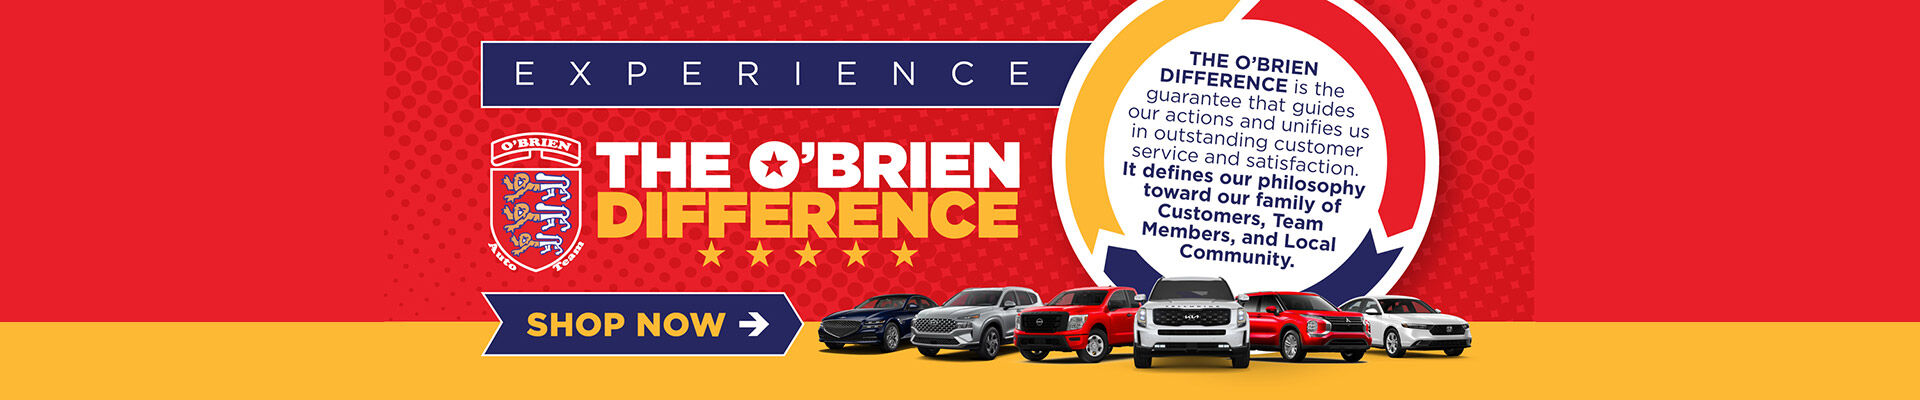 Experience the O'Brien Difference